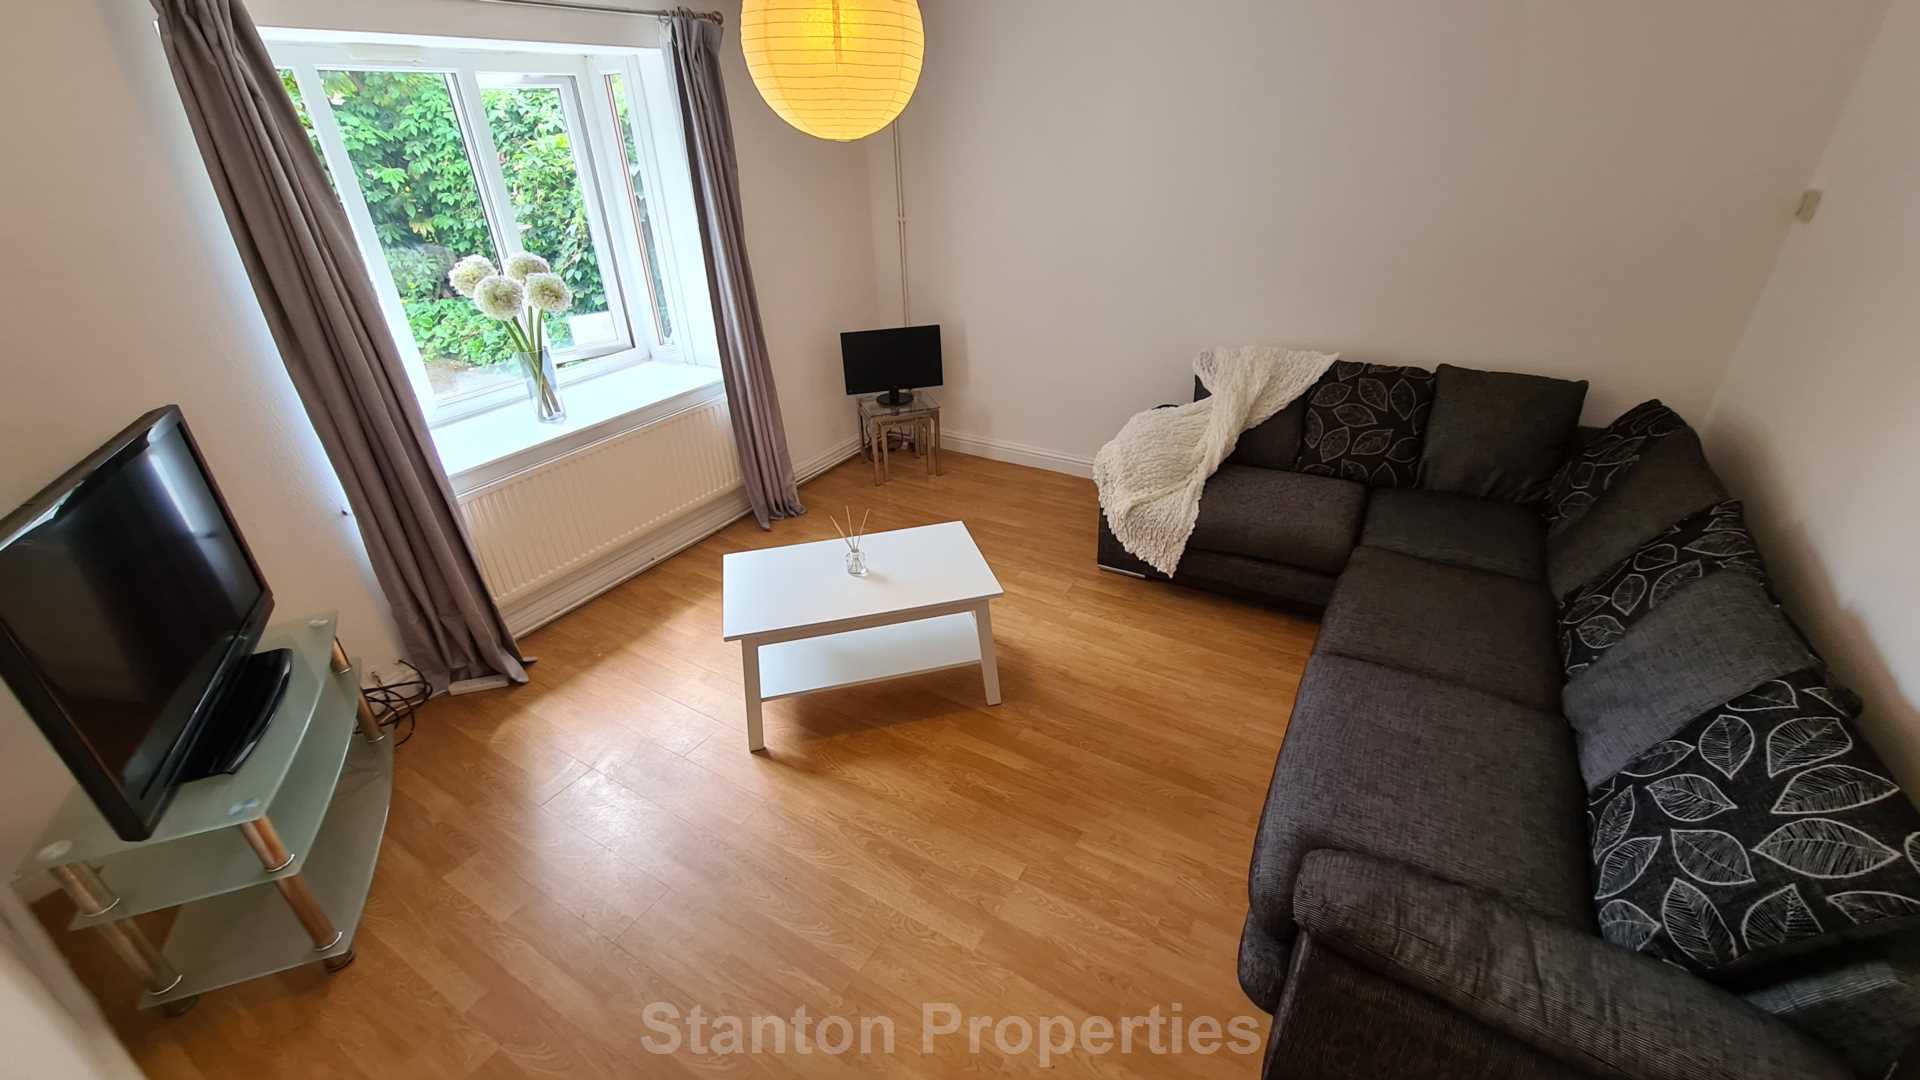 £155 pppw, See Video Tour, Granville Road, Fallowfield, Image 1